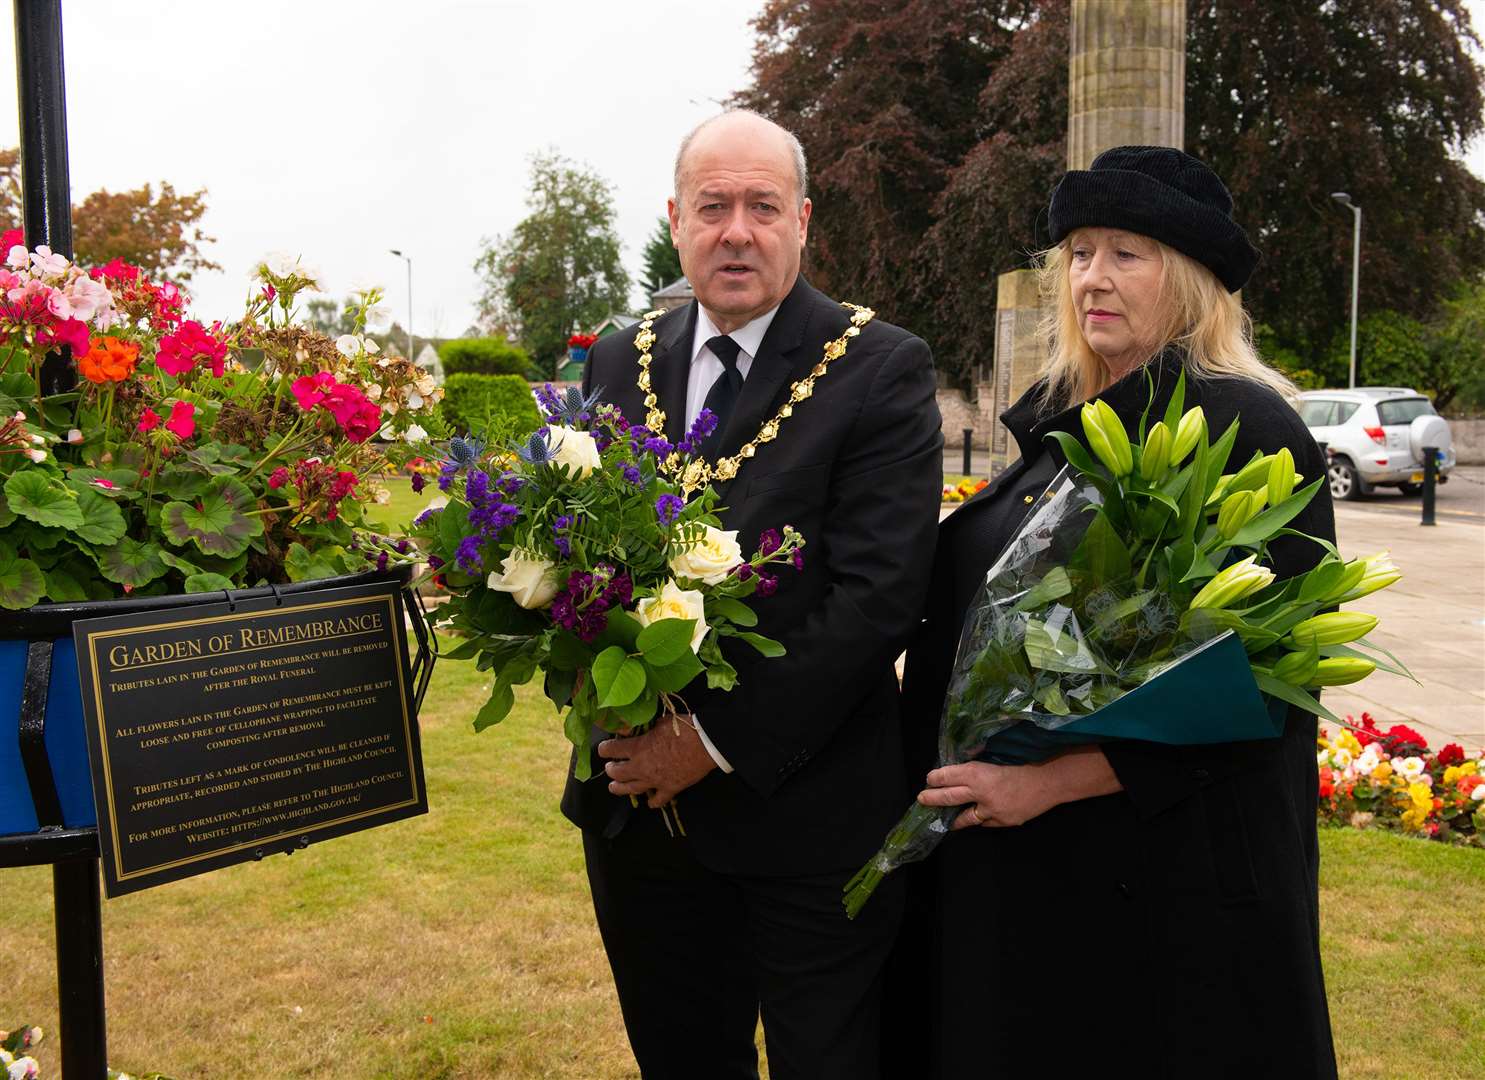 Provost Laurie Fraser and Councillor Barbara Jarvie are the Queen's Remembrance Garden at the War Memorial.